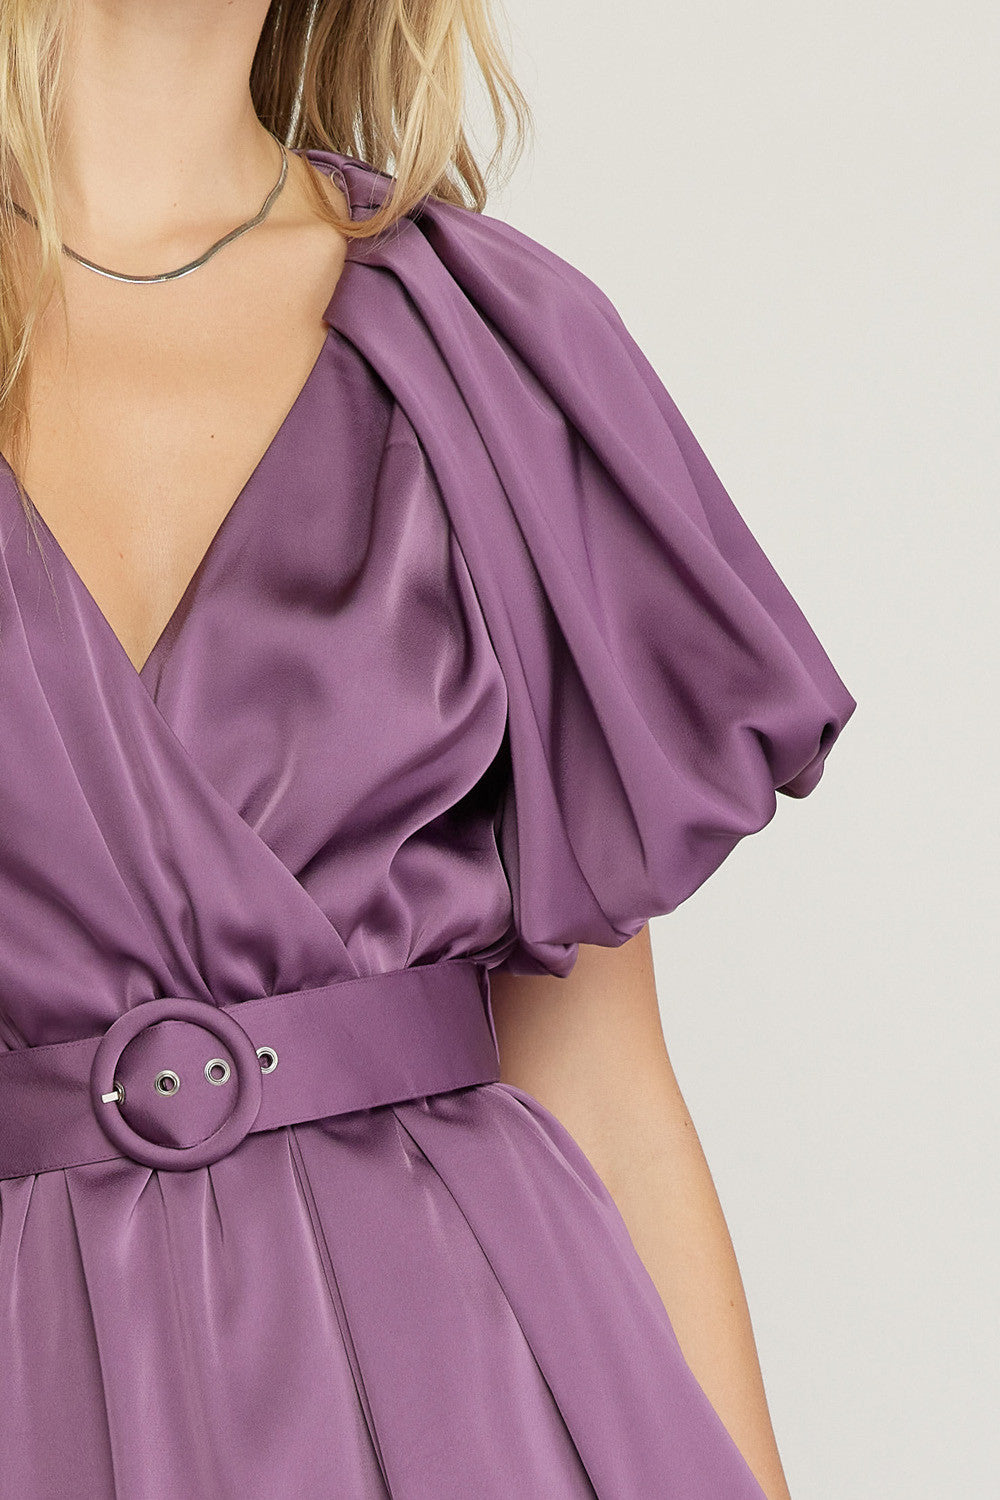 The All Eyes On You Satin Wrap Dress